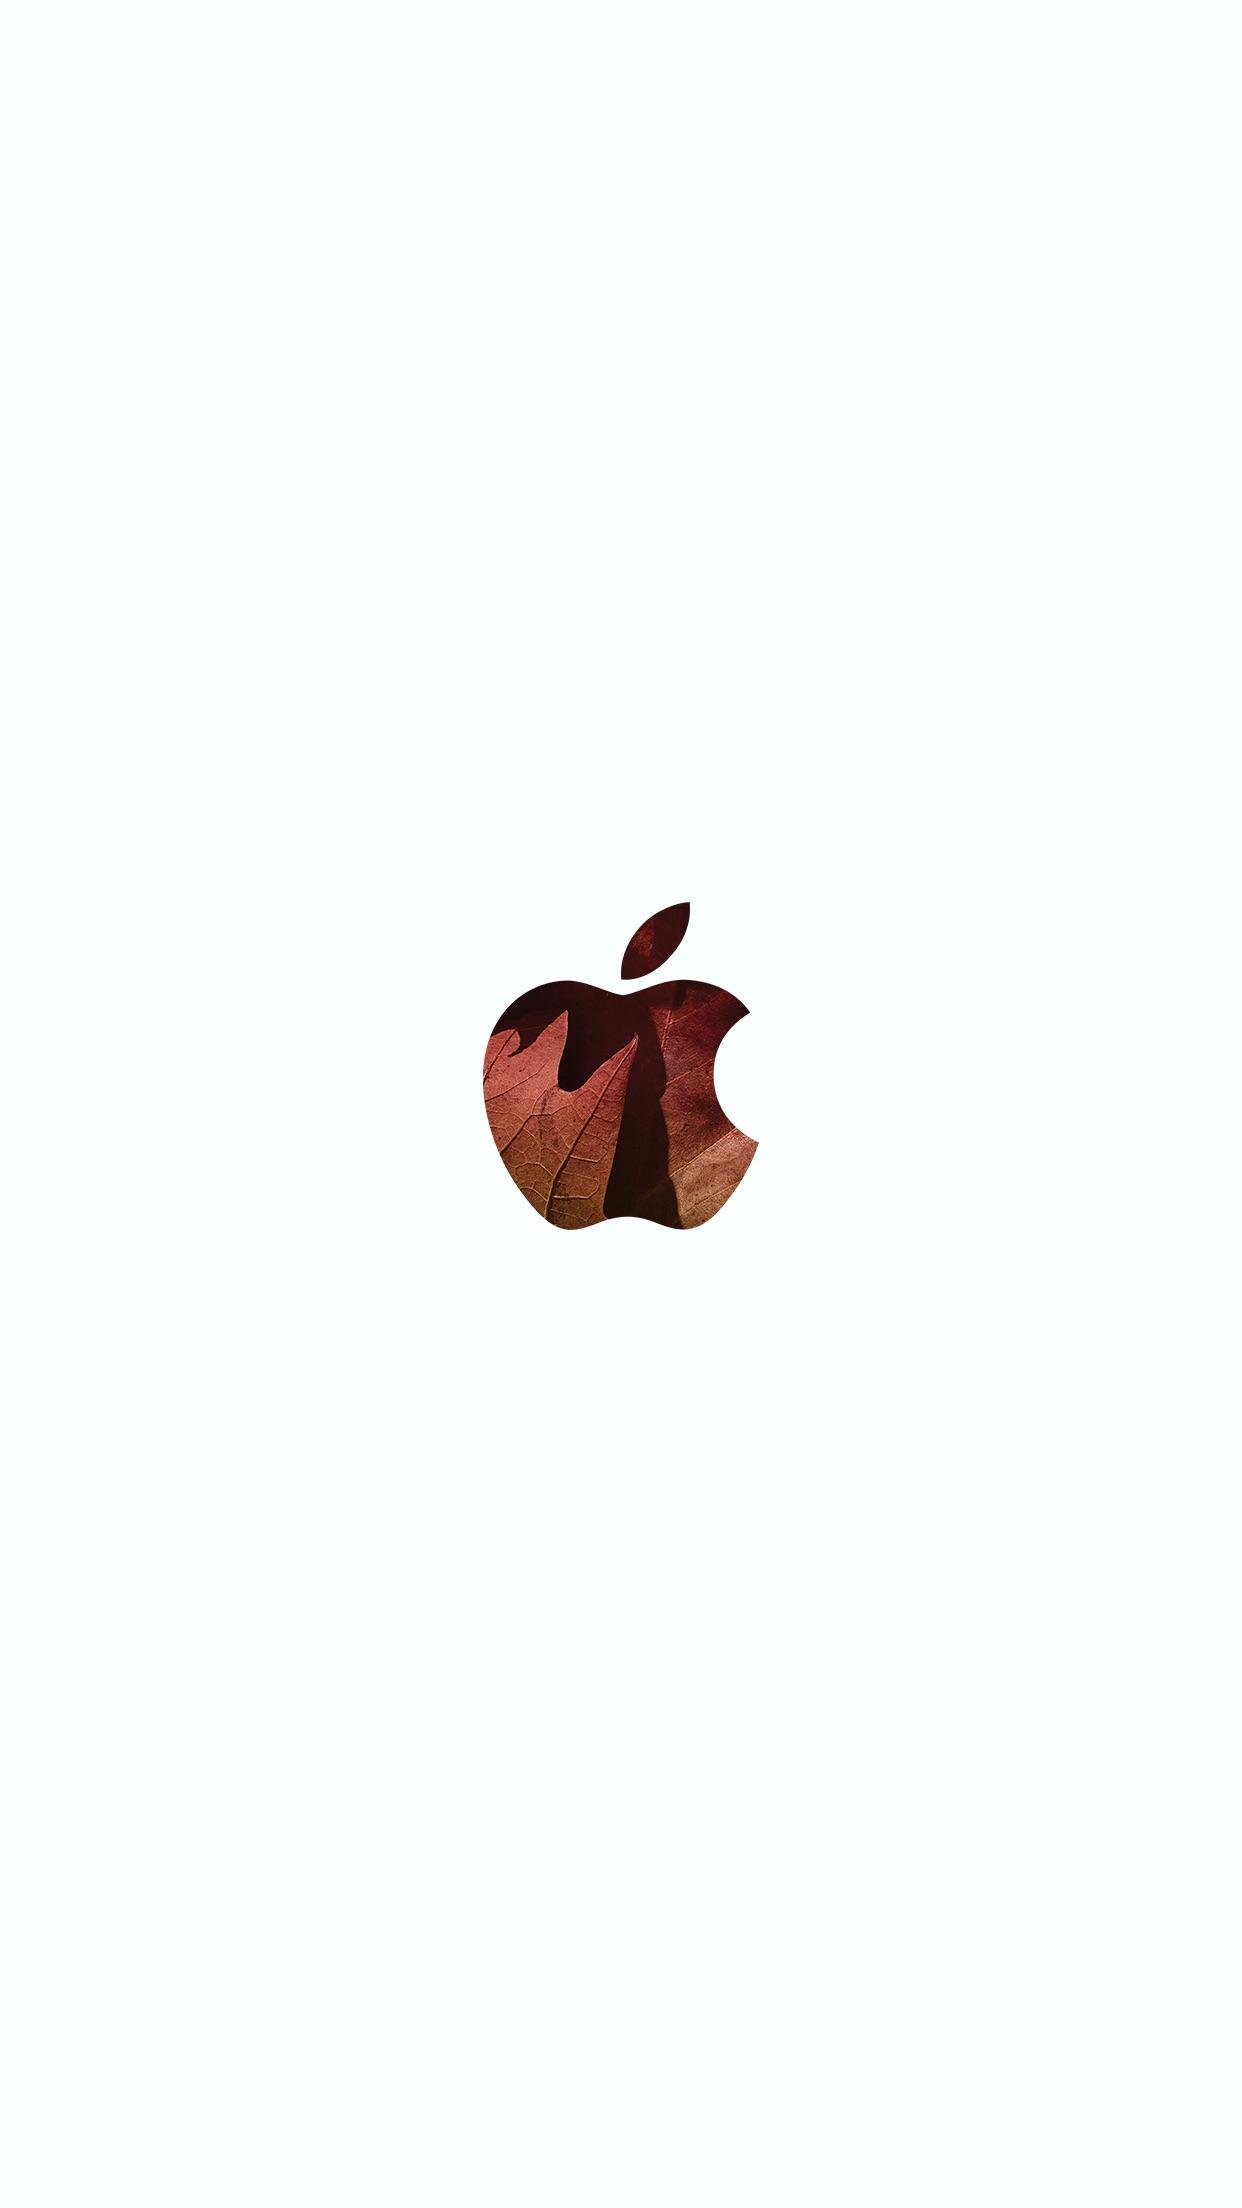 Made this Fall Apple wallpaper for y'all to enjoy, it'll probably look cool with the Autumn colored phone cases (Link in the comments)